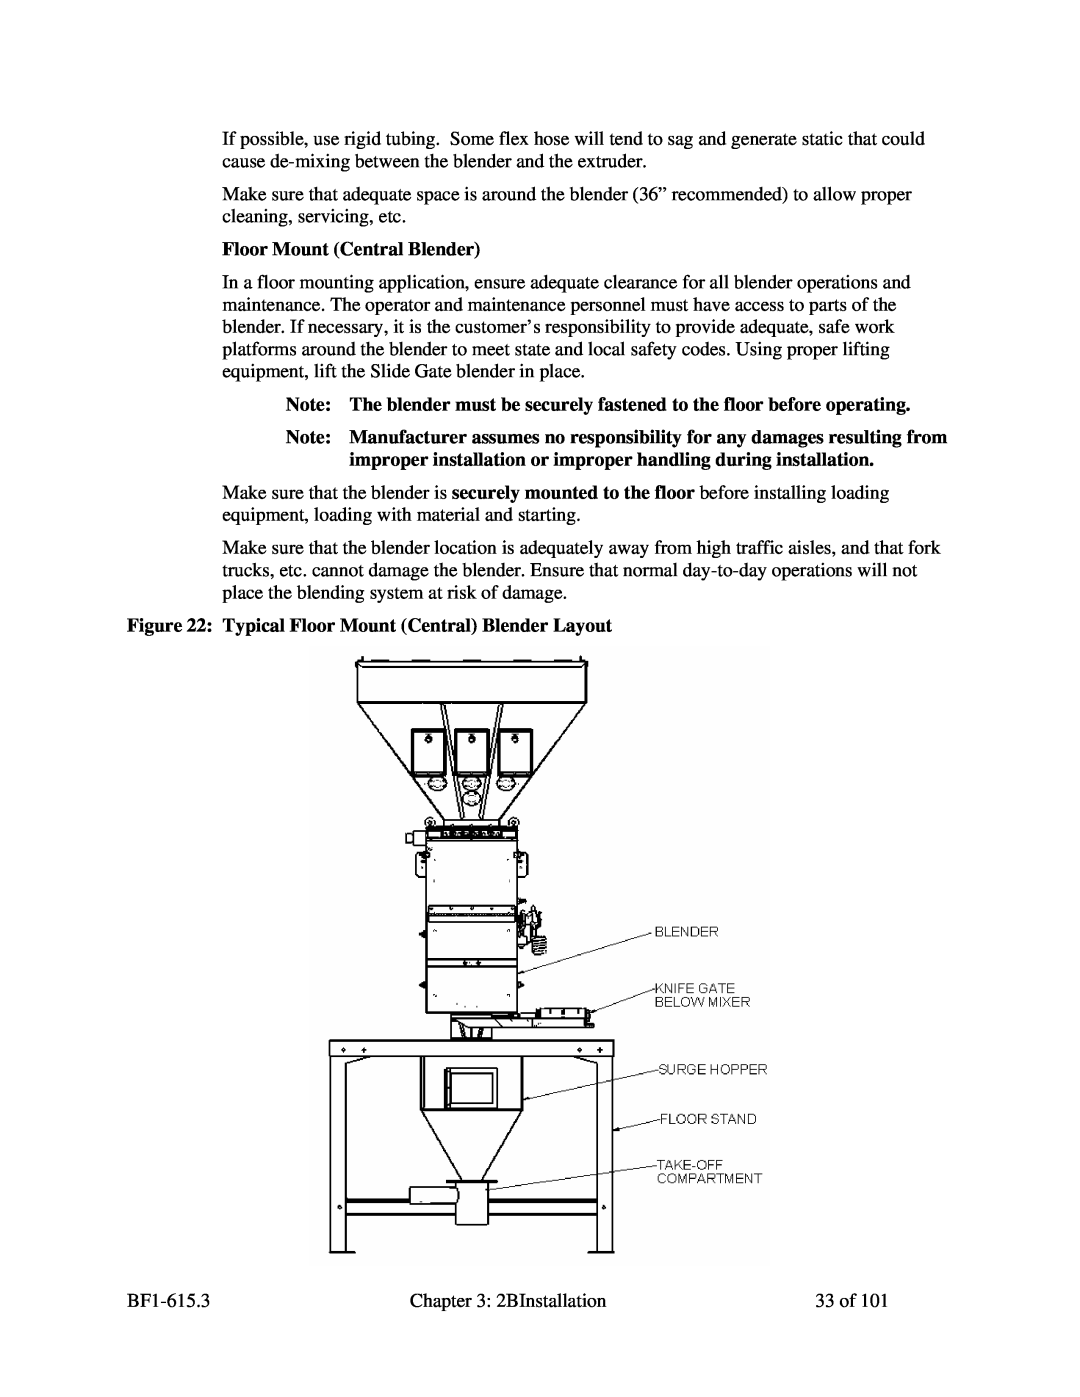 Mitsubishi Electronics 882.00273.00 specifications Typical Floor Mount Central Blender Layout 